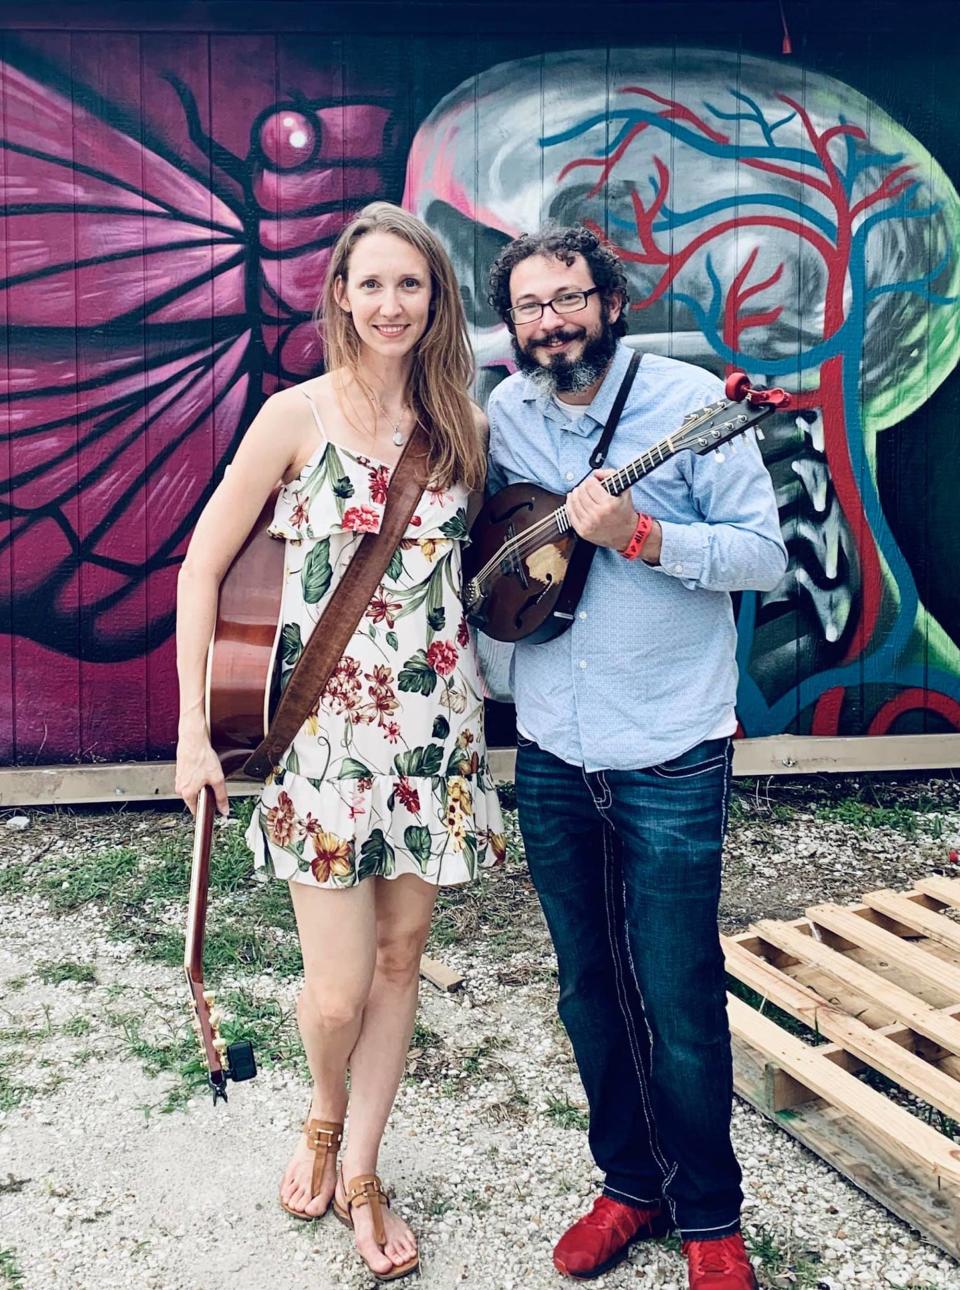 Kathryn Belle Long and Mickey Abraham play Saturday at Blue Tavern.